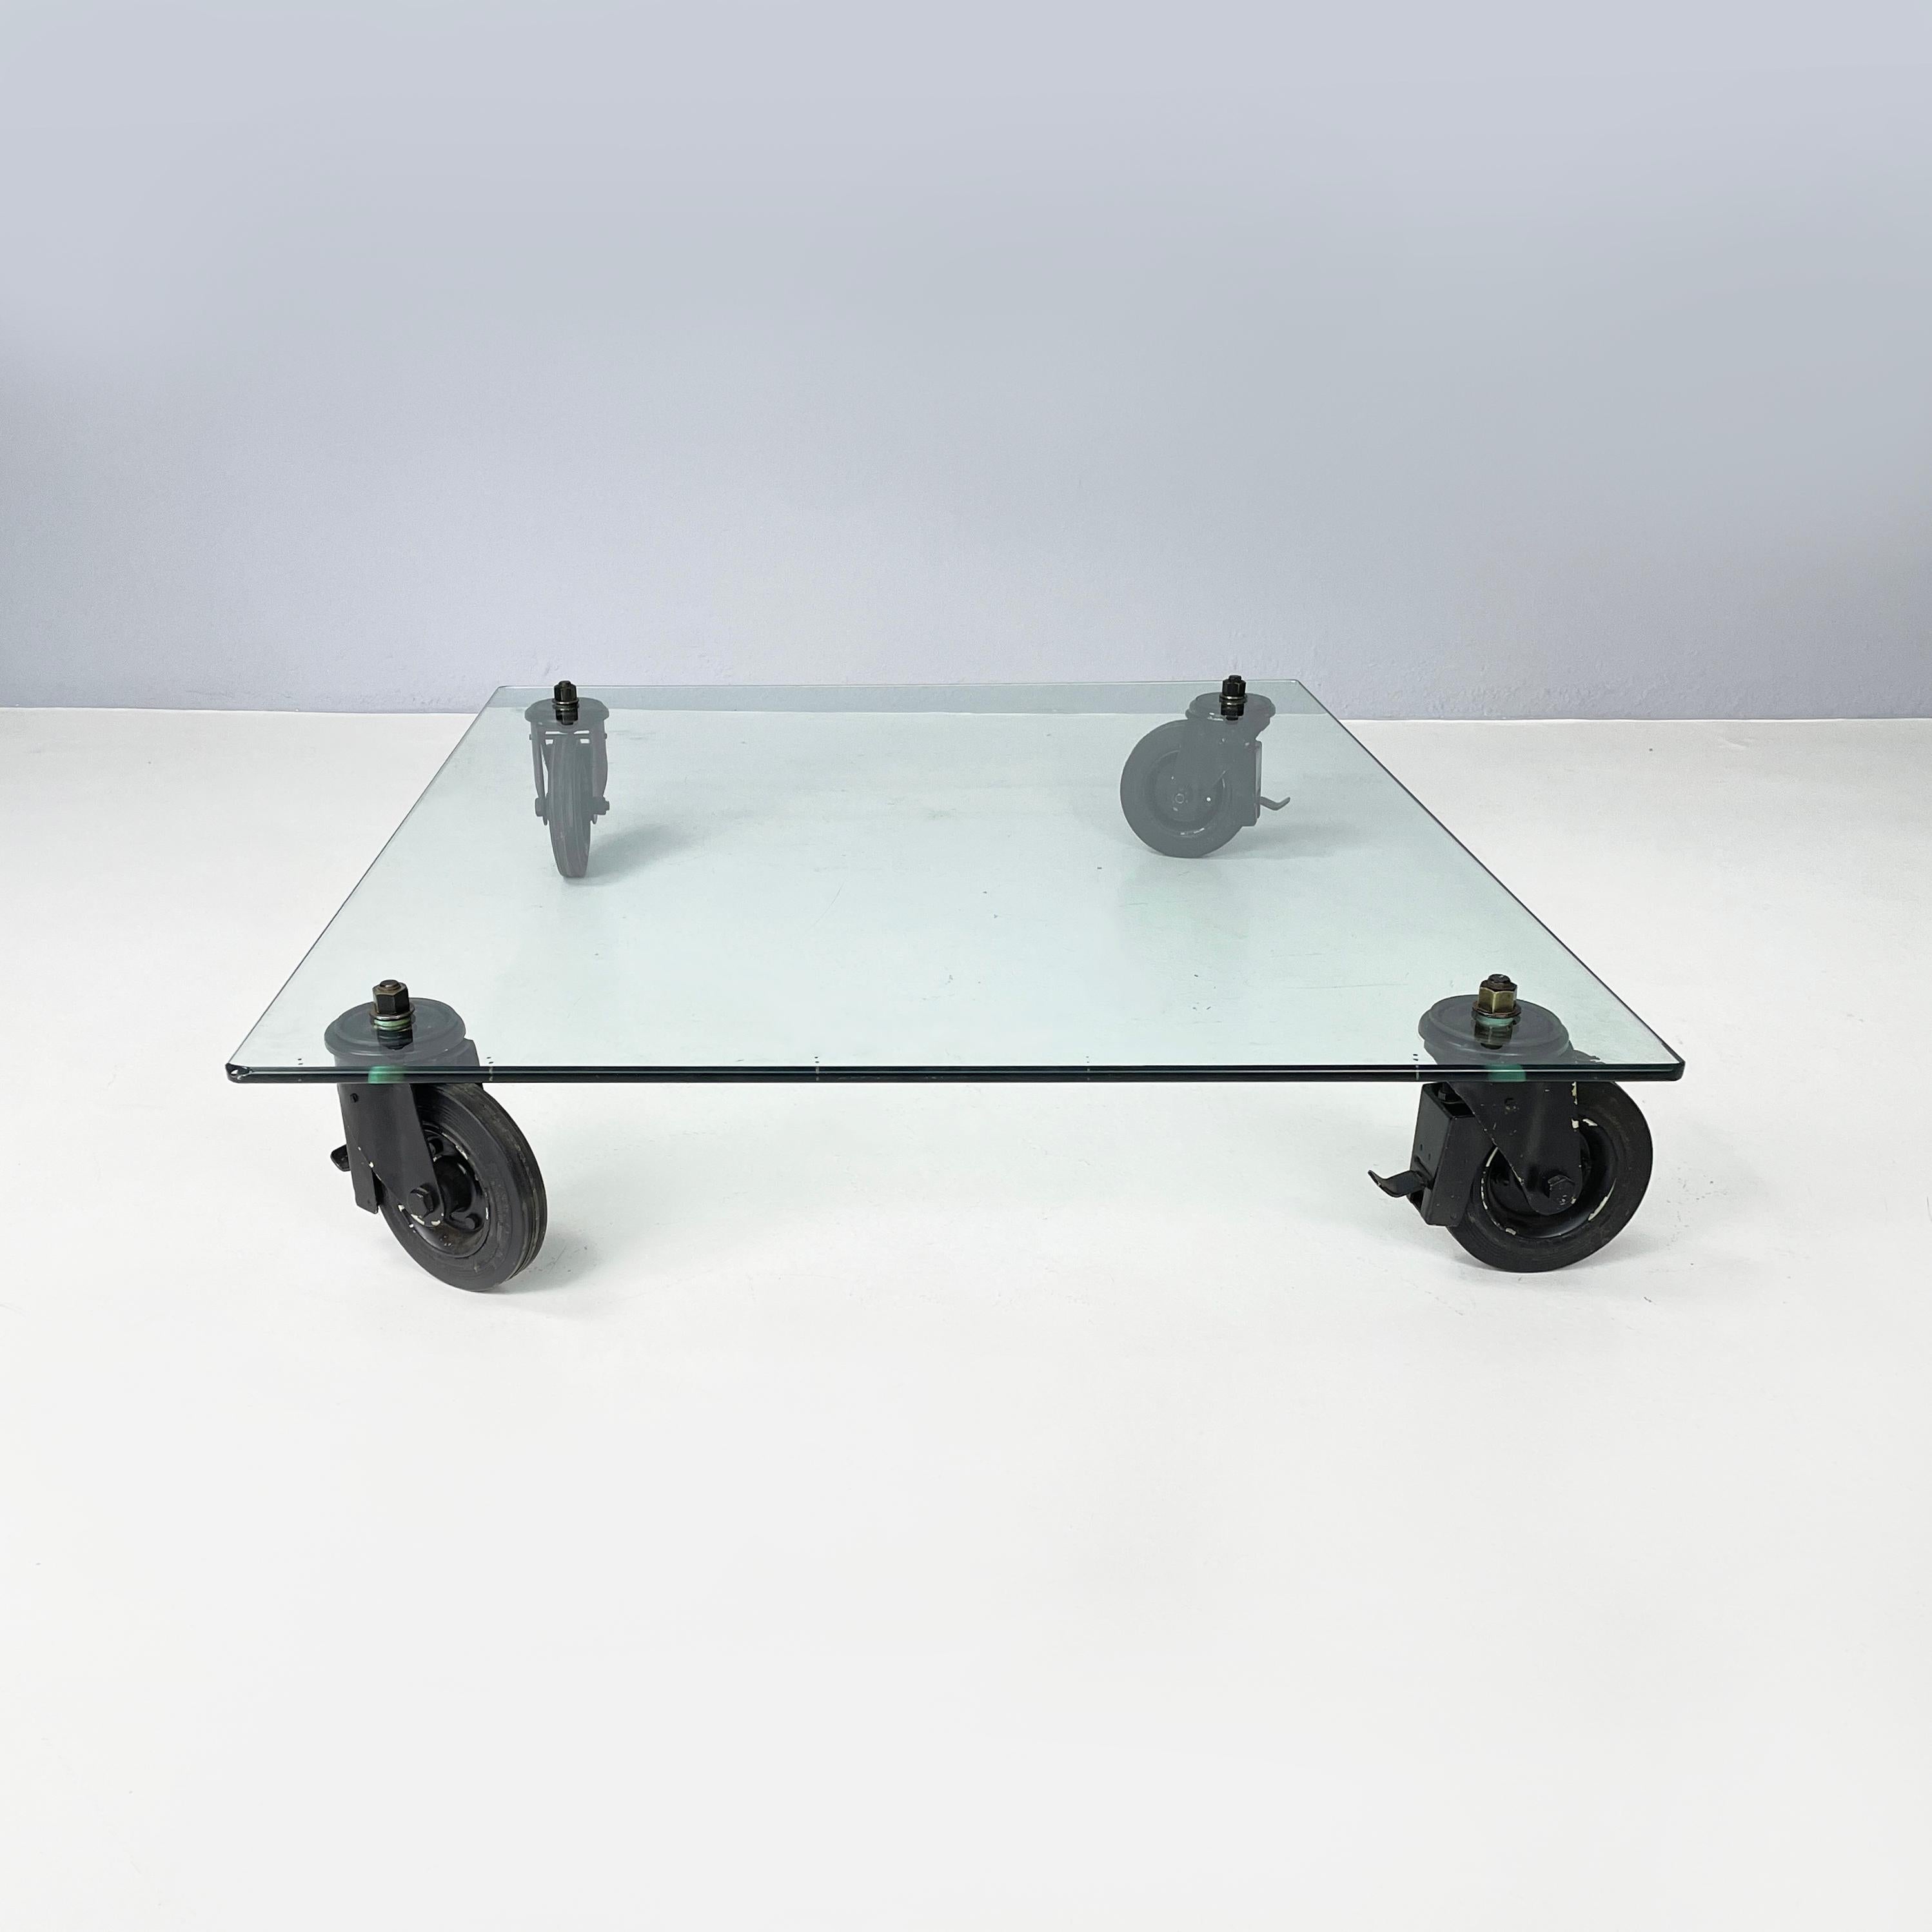 Italian industrial modern Glass coffee table by Gae Aulenti for Fontana Arte, 1980s
Coffee table with thick rectangular glass top. The 4 legs, fixed to the glass with large screws, are 4 rubber and black metal wheels, which allow the table to be